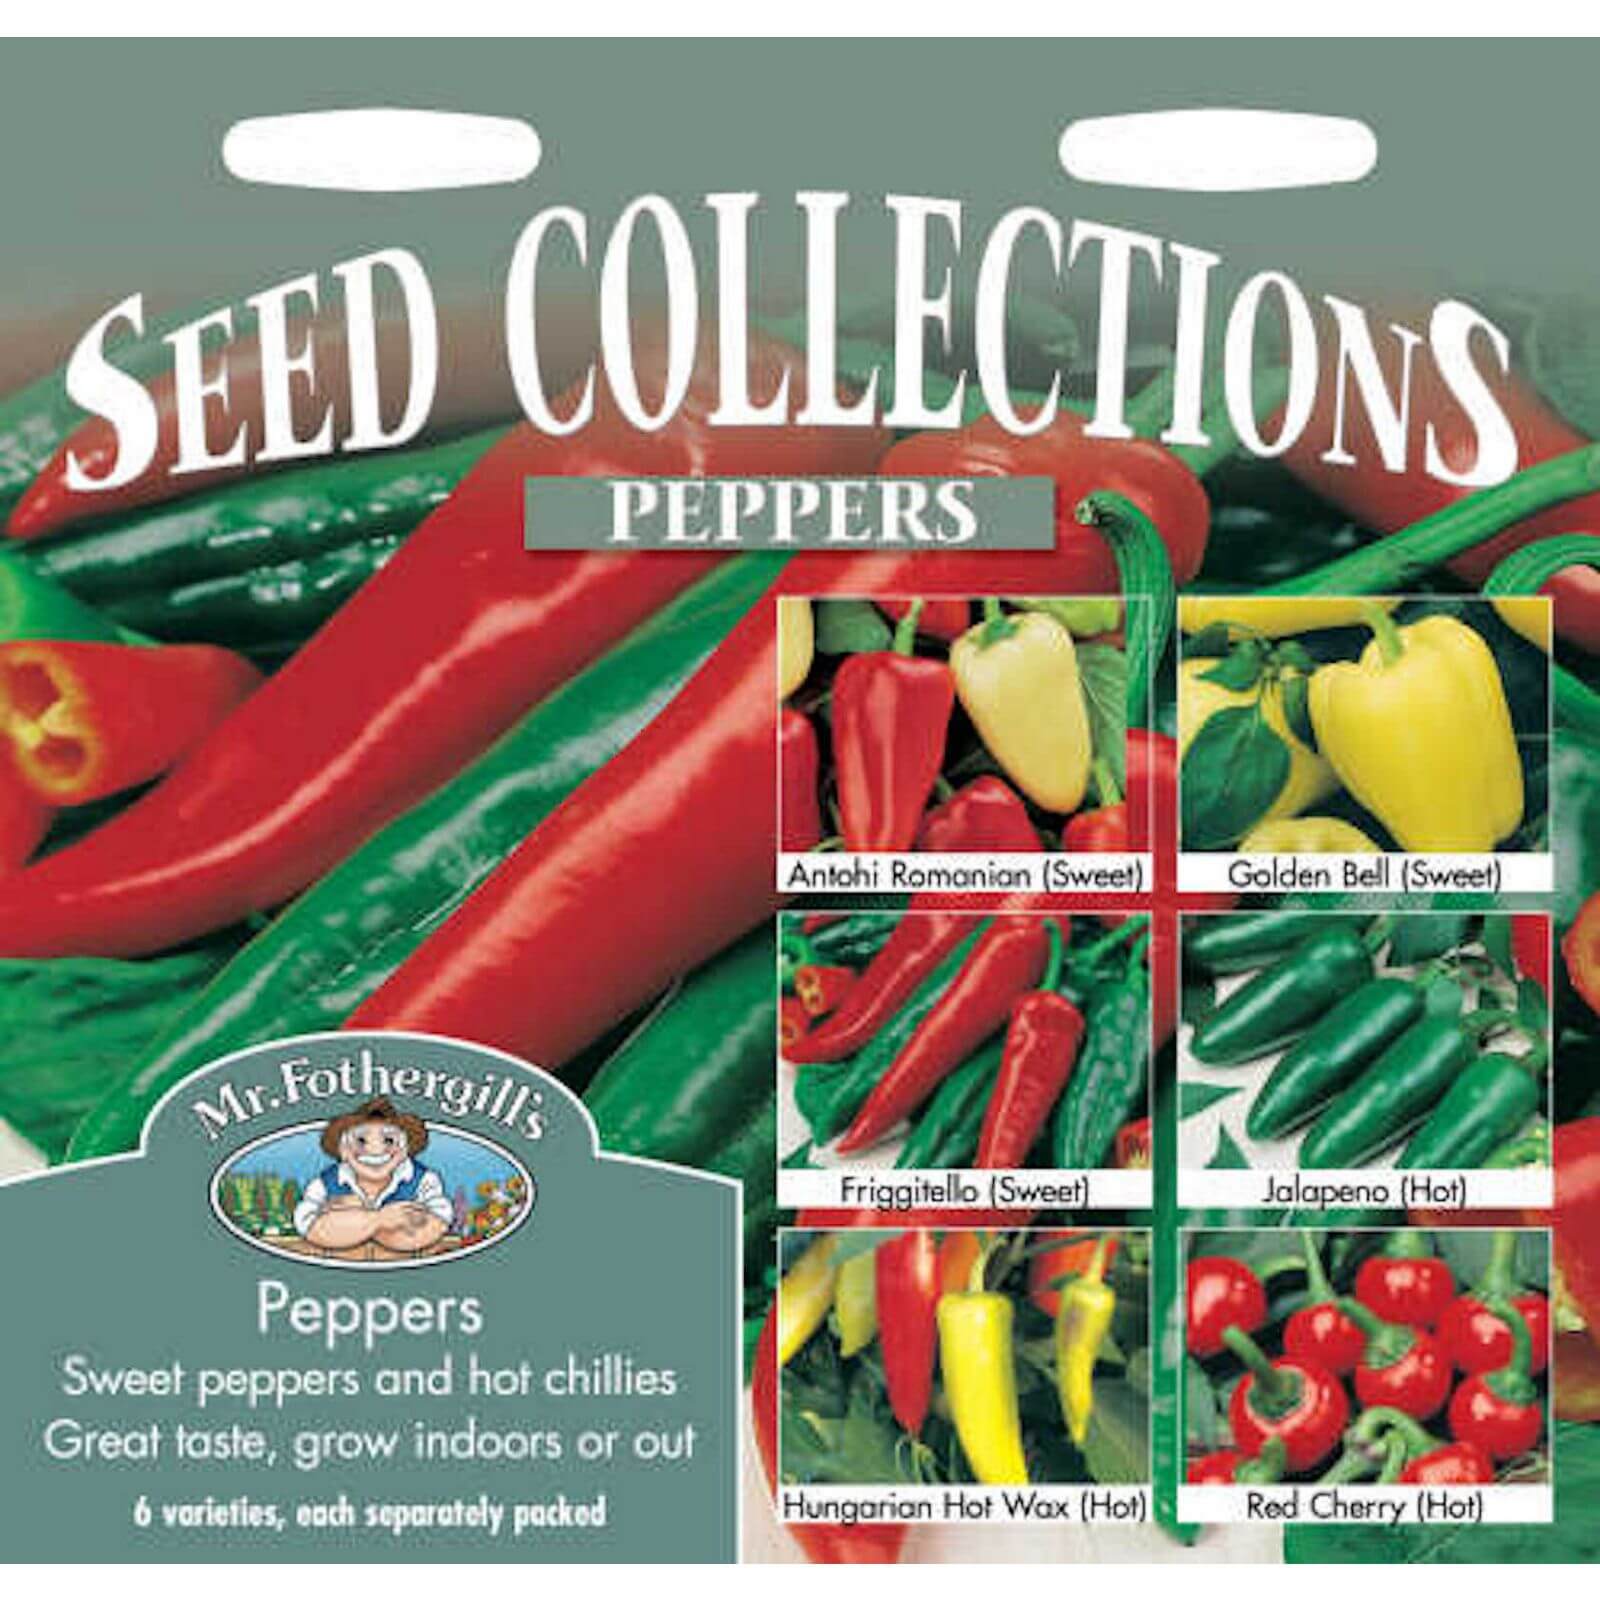 Mr. Fothergill's Peppers Collection (Capsicum Annuus) Seeds